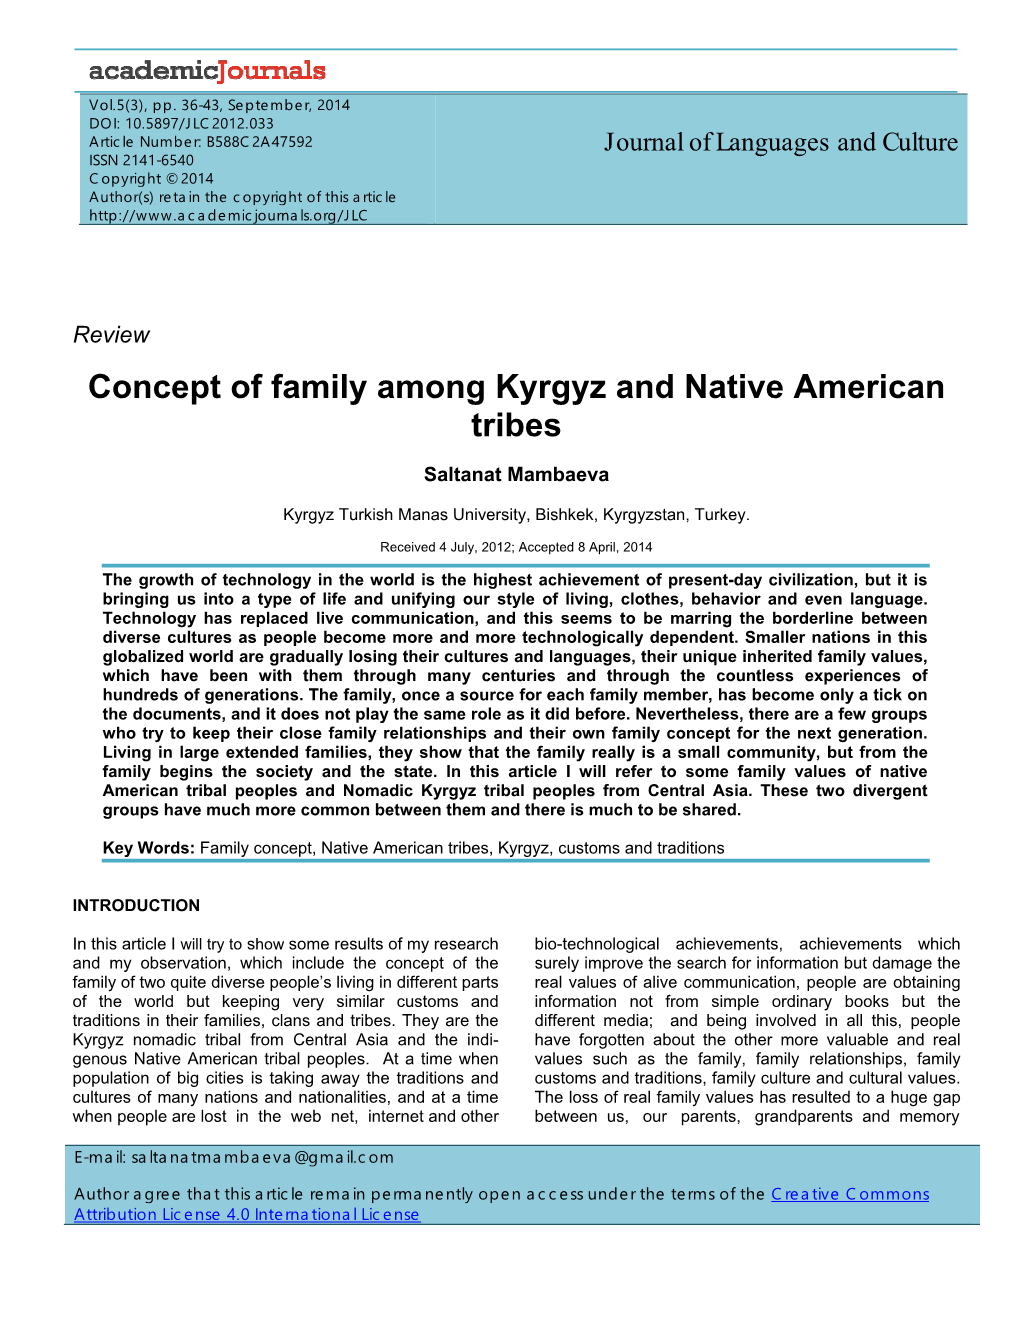 Concept of Family Among Kyrgyz and Native American Tribes